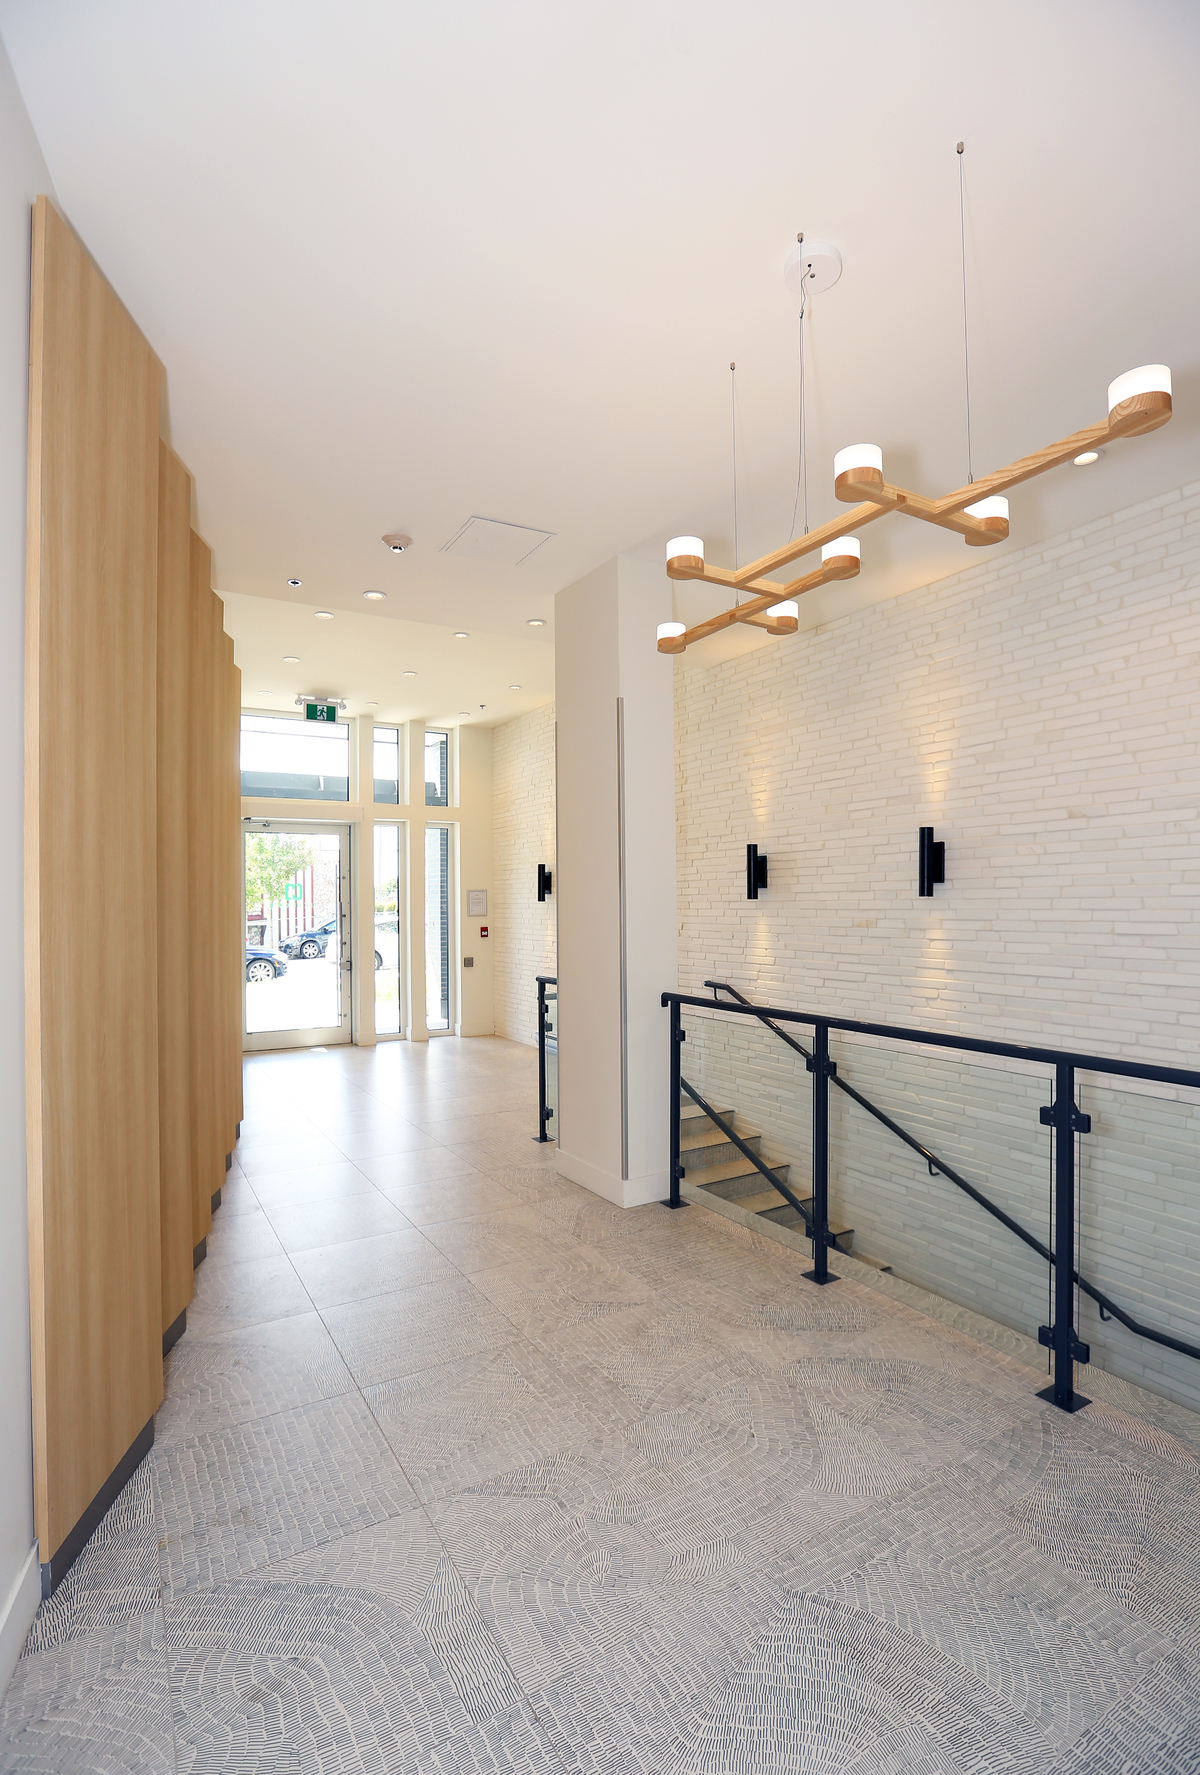 Interior entrance view of The Heights, mixed-use project with five storeys of light wood-frame residential dwellings, showing wood accents and trim